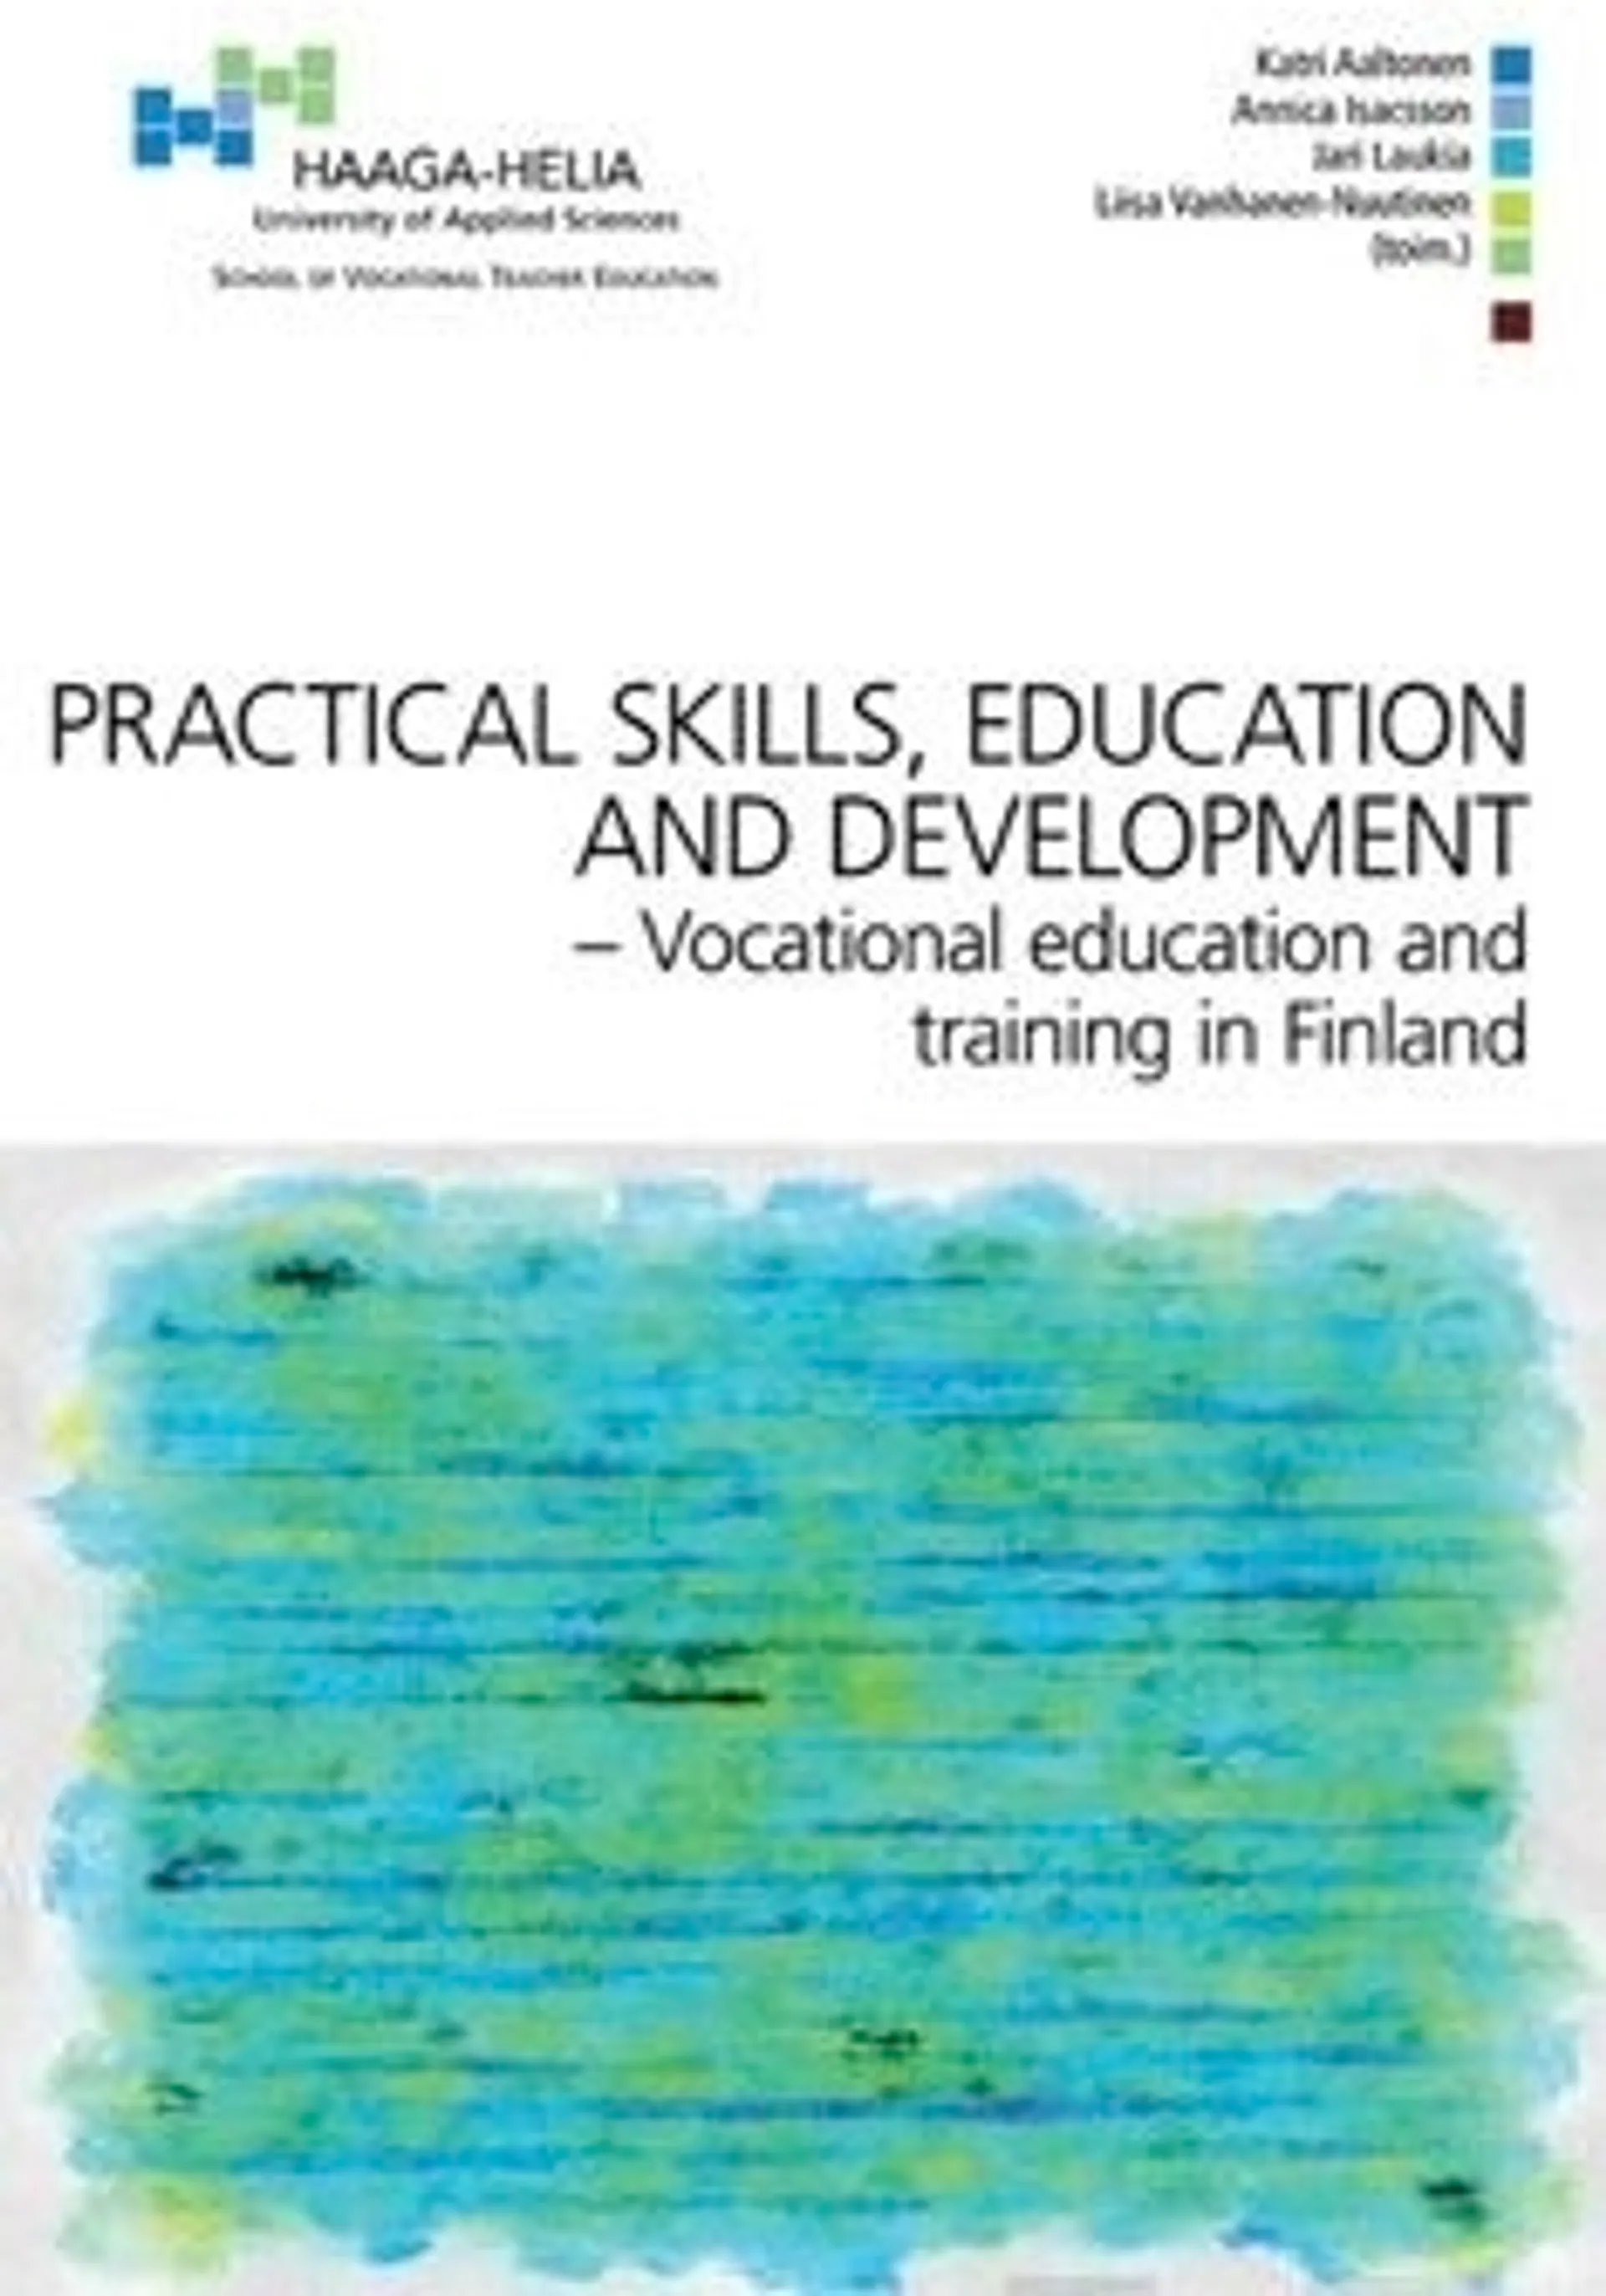 Practical skills, education and development